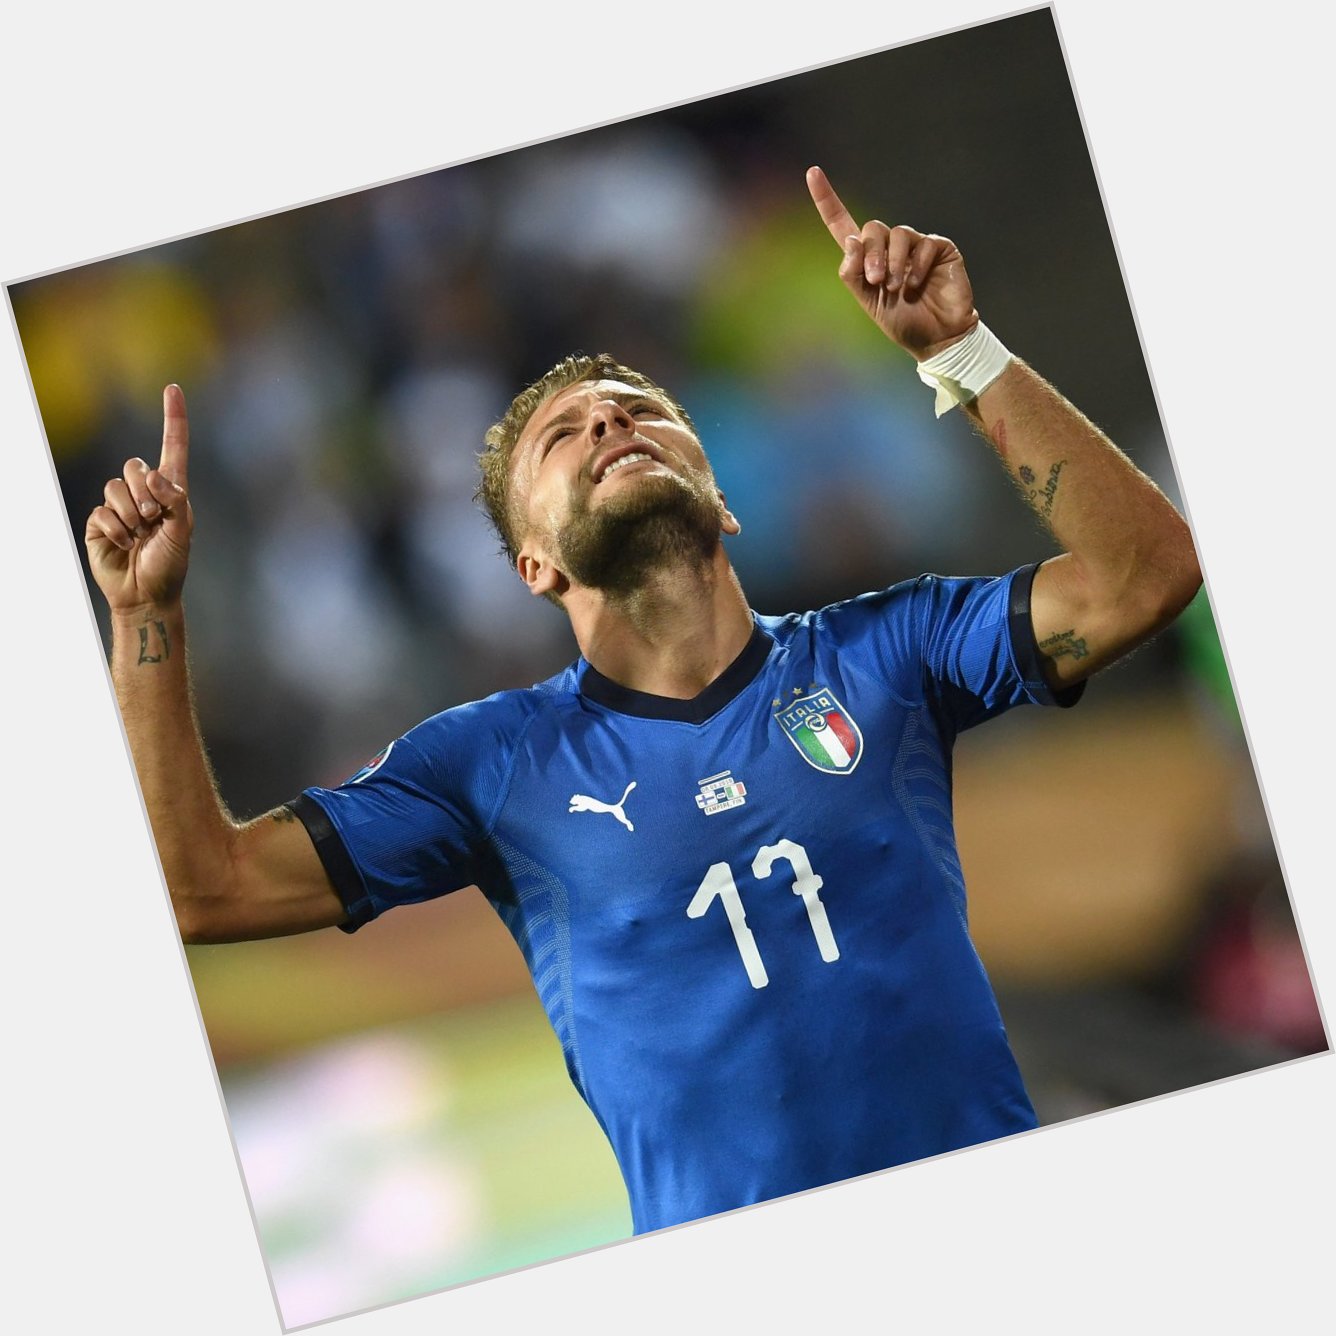 Happy Birthday to Lazio and Italy Forward Ciro Immobile,

How many goals would he get in the Premier League? 